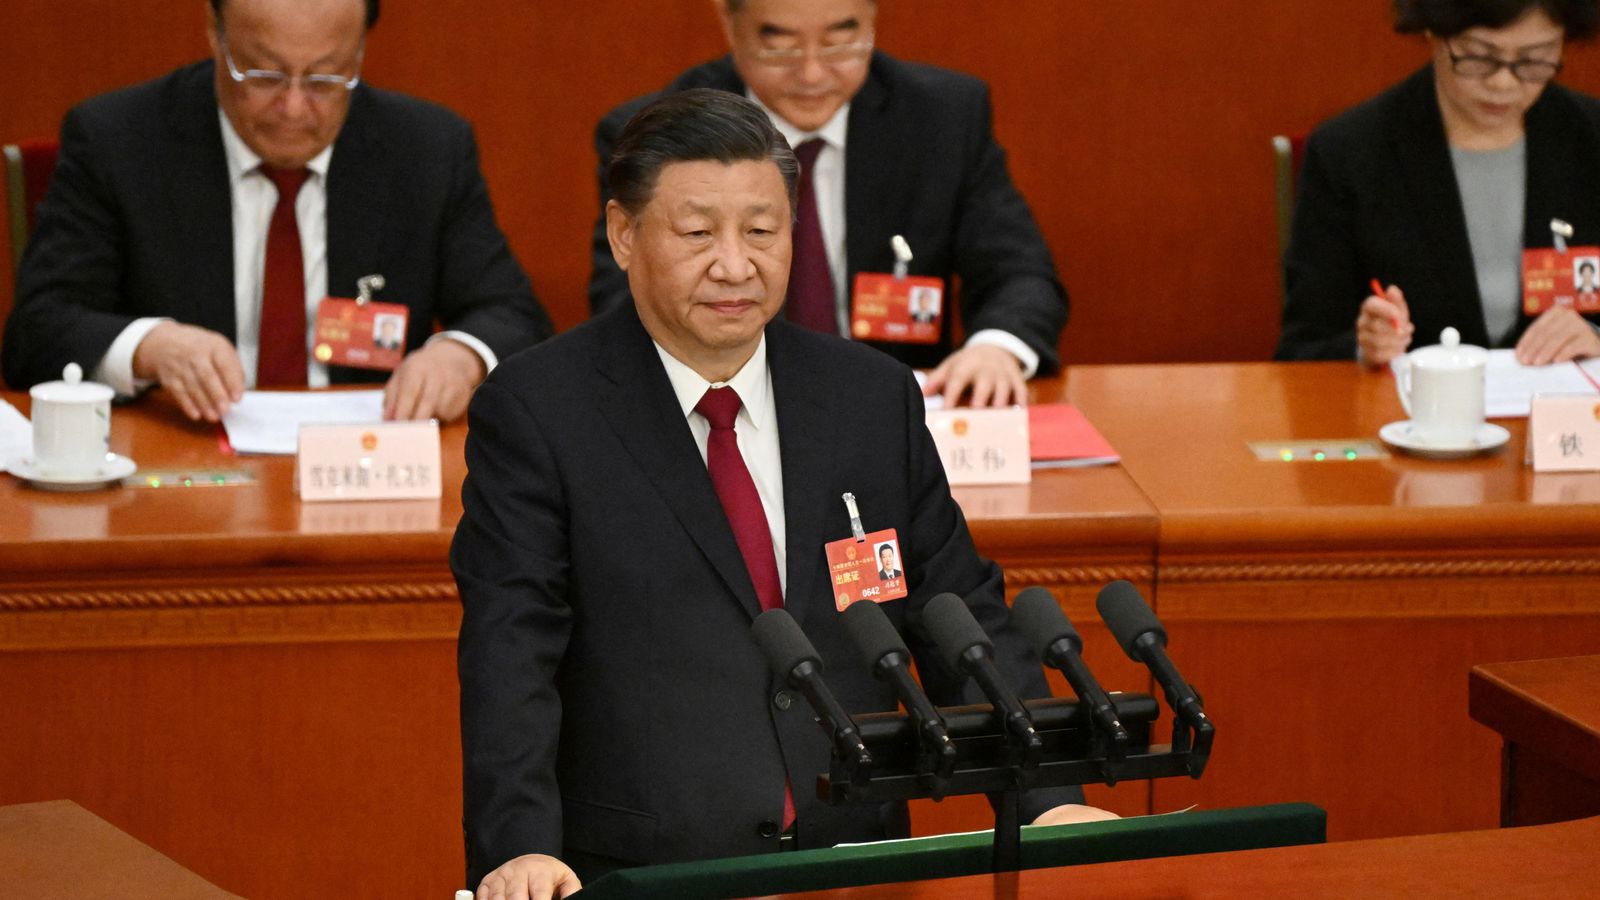 China's military must become 'Great Wall of Steel', President Xi Jinping says